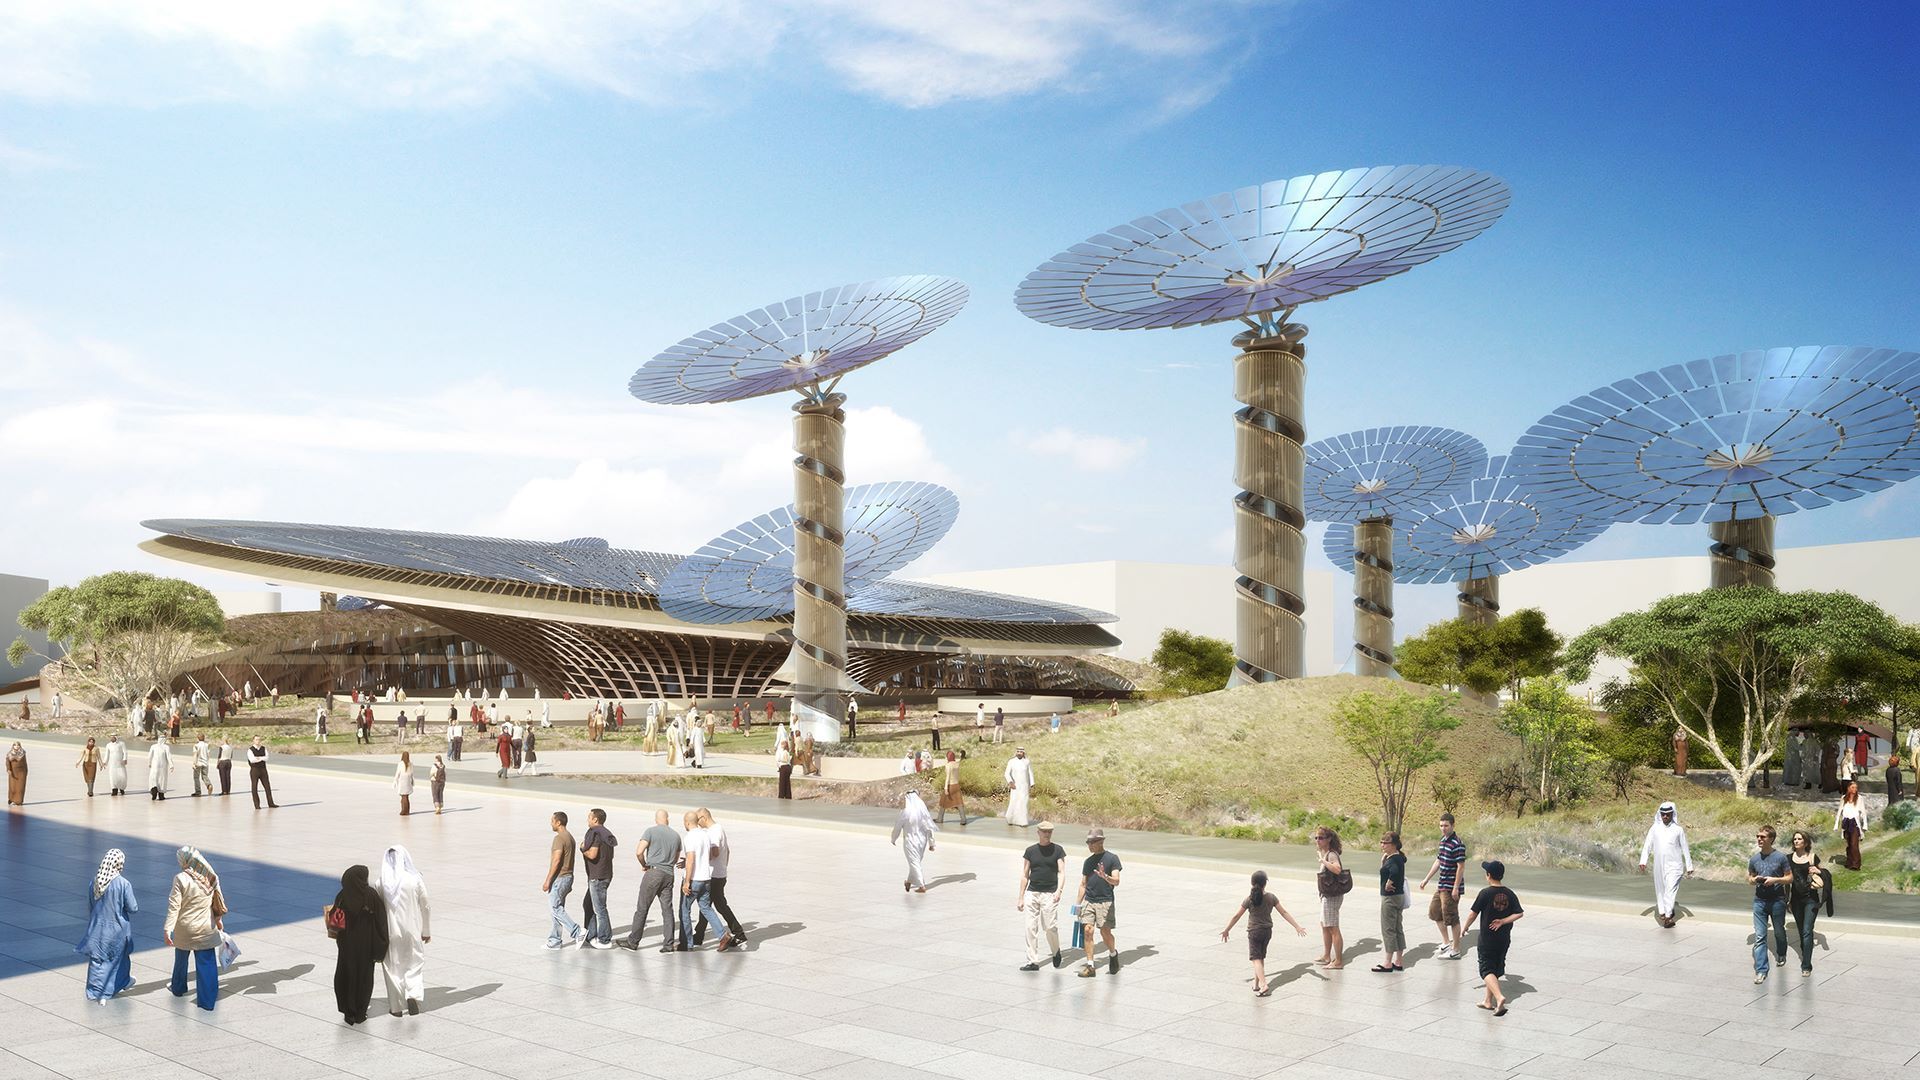 Winners of Dubai Expo 2020 announced | BIG, Foster, and ...